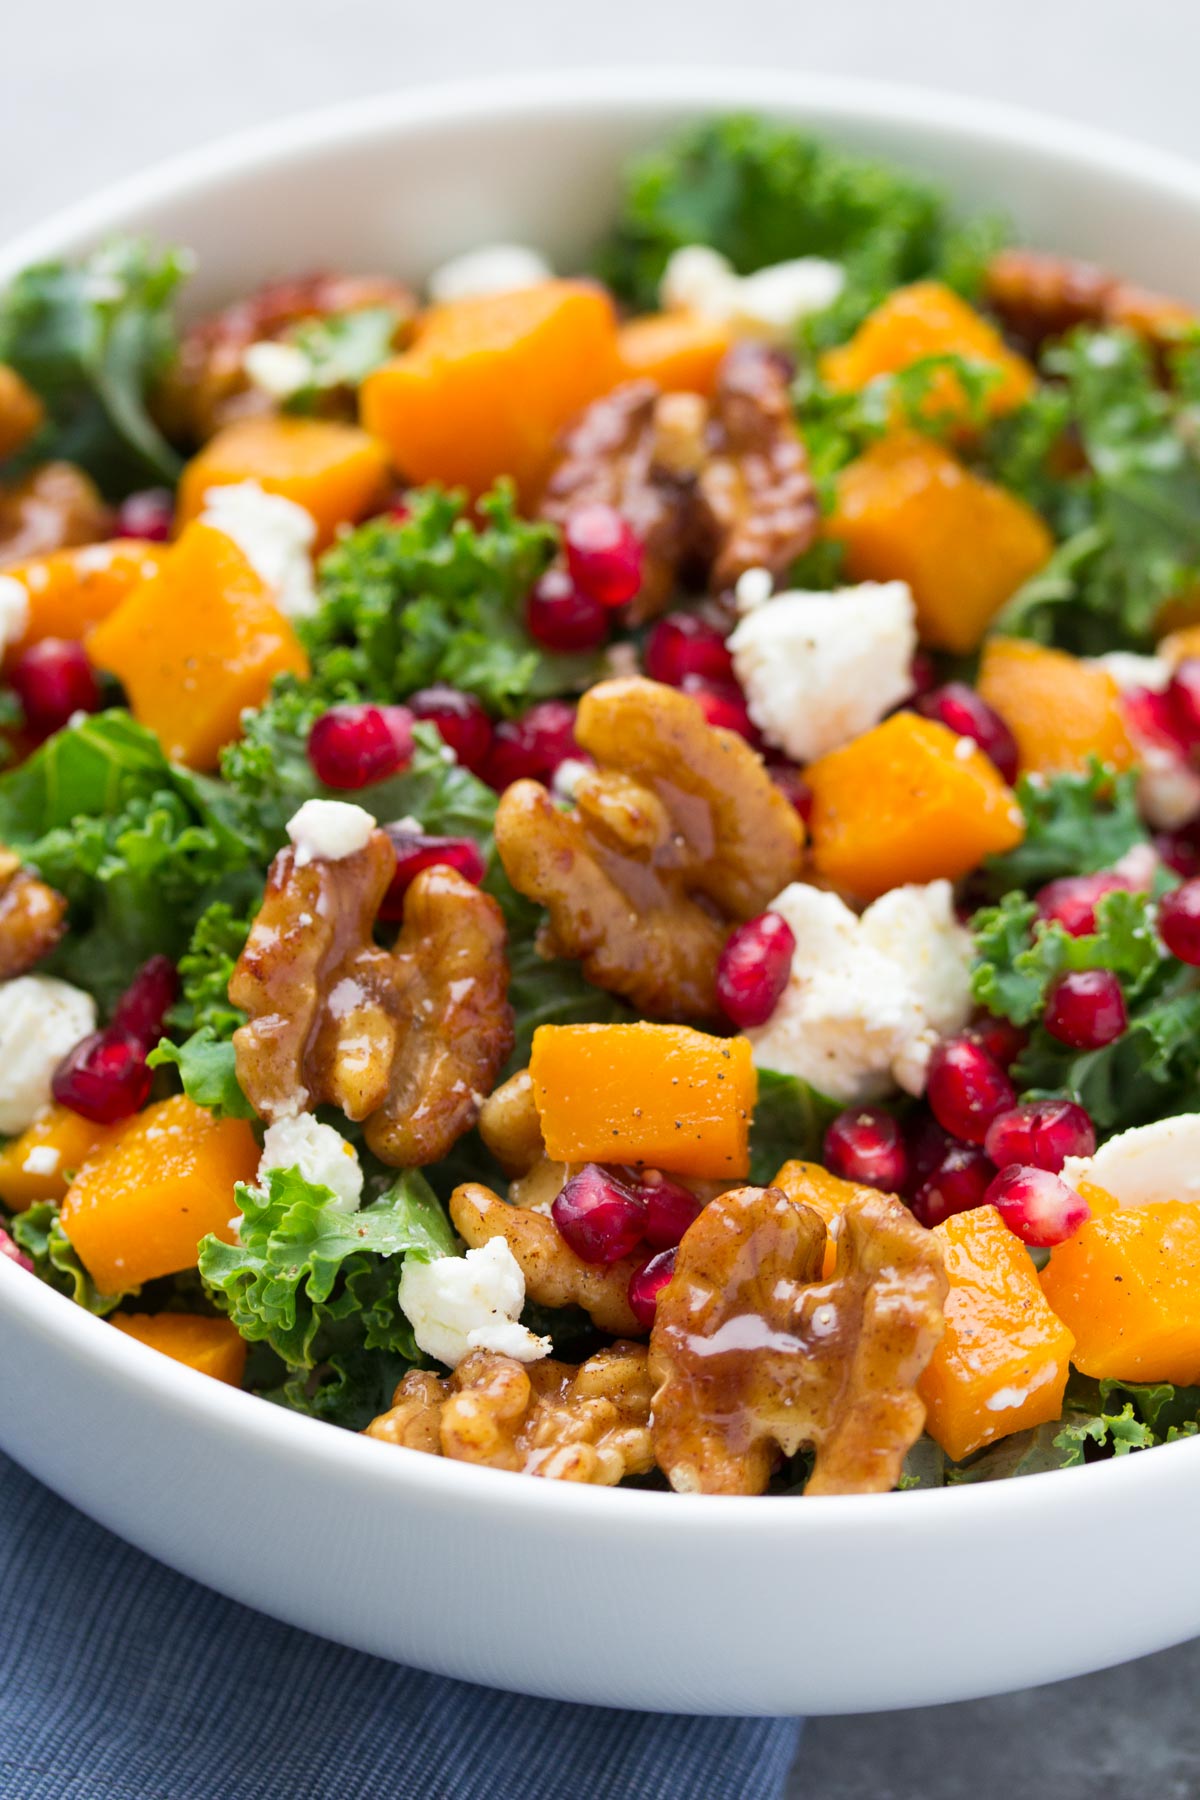 Butternut squash salad with kale, candied walnuts, pomegranate seeds and goat cheese.